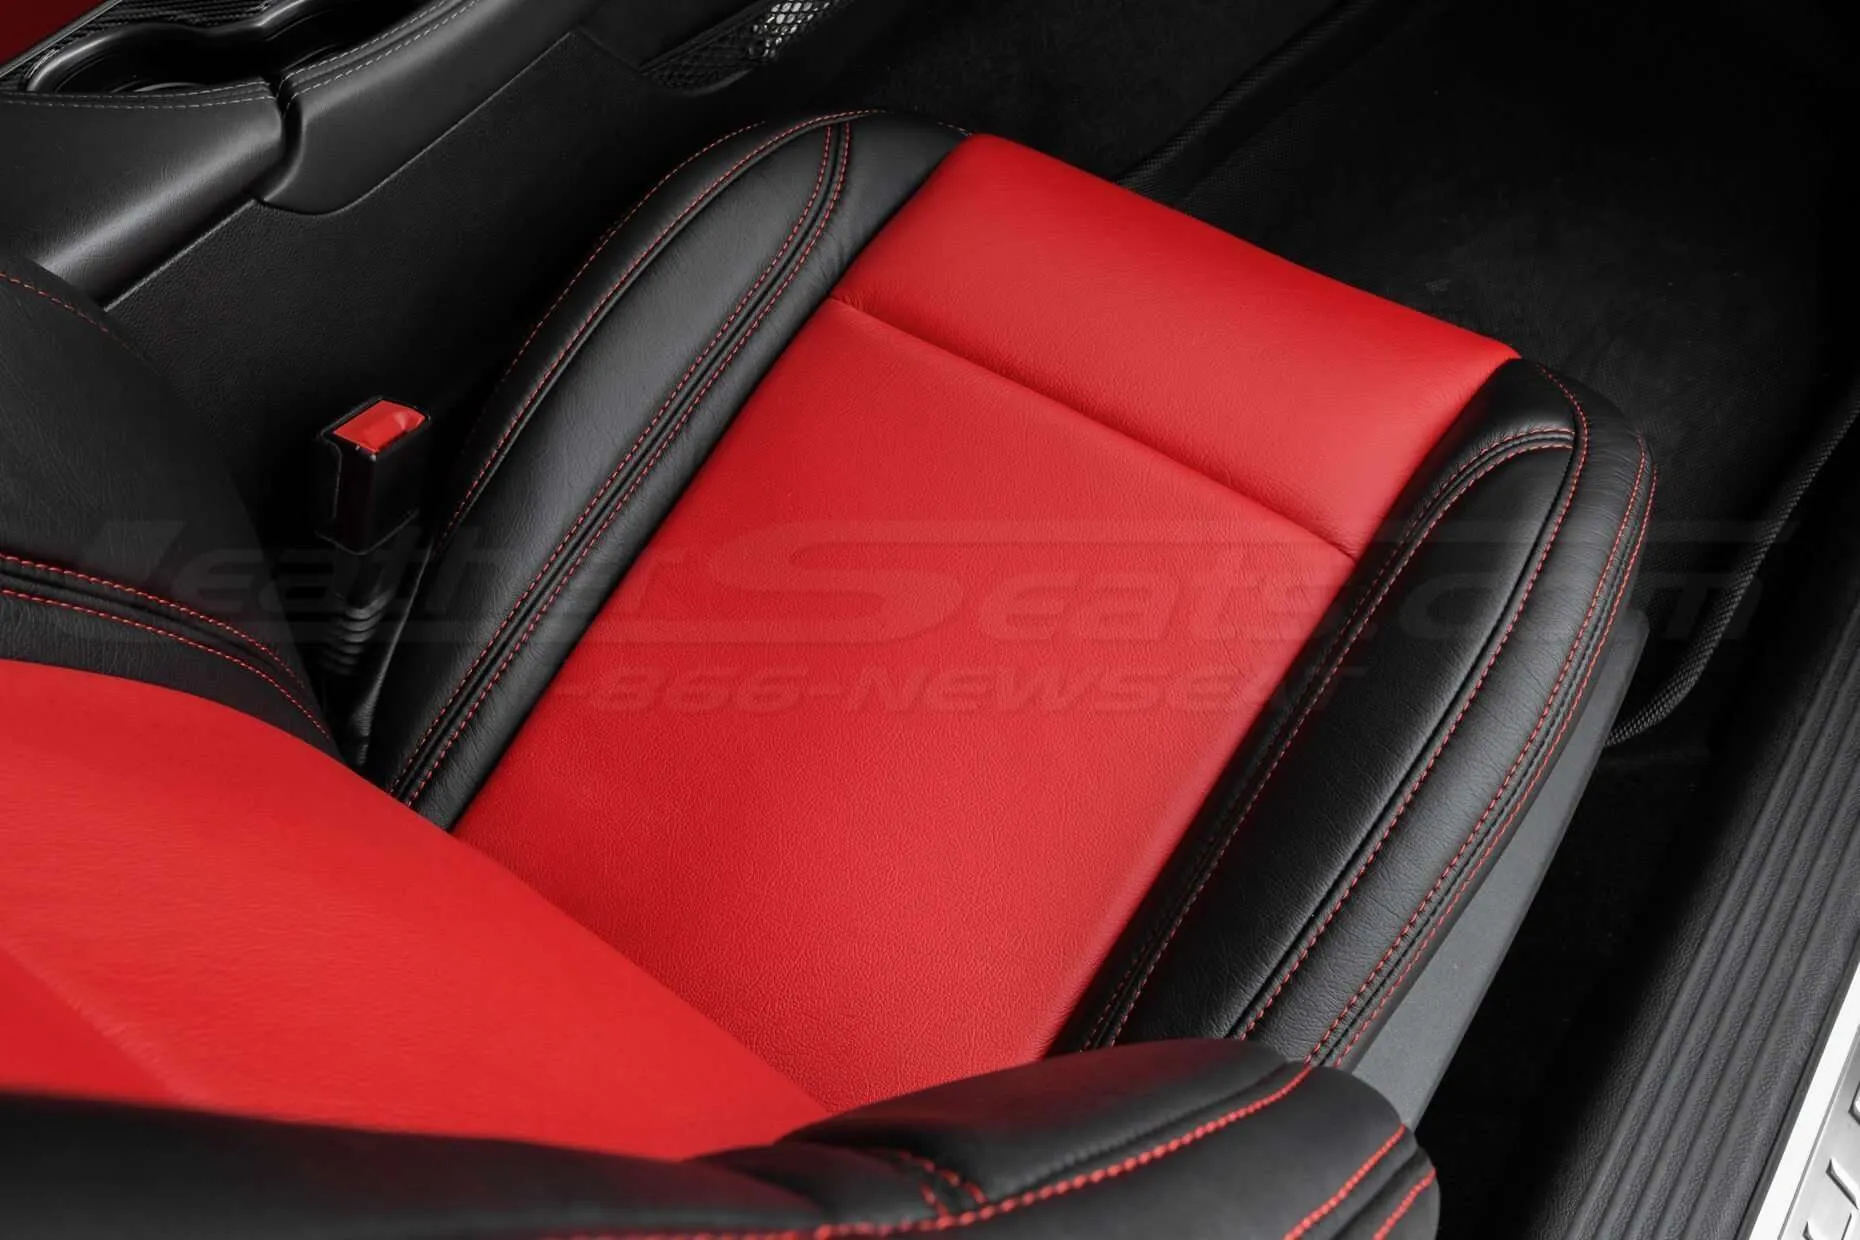 15-20 Dodge Challenger Upholstery Kit - Black & Bright Red - Installed - Seat cushion